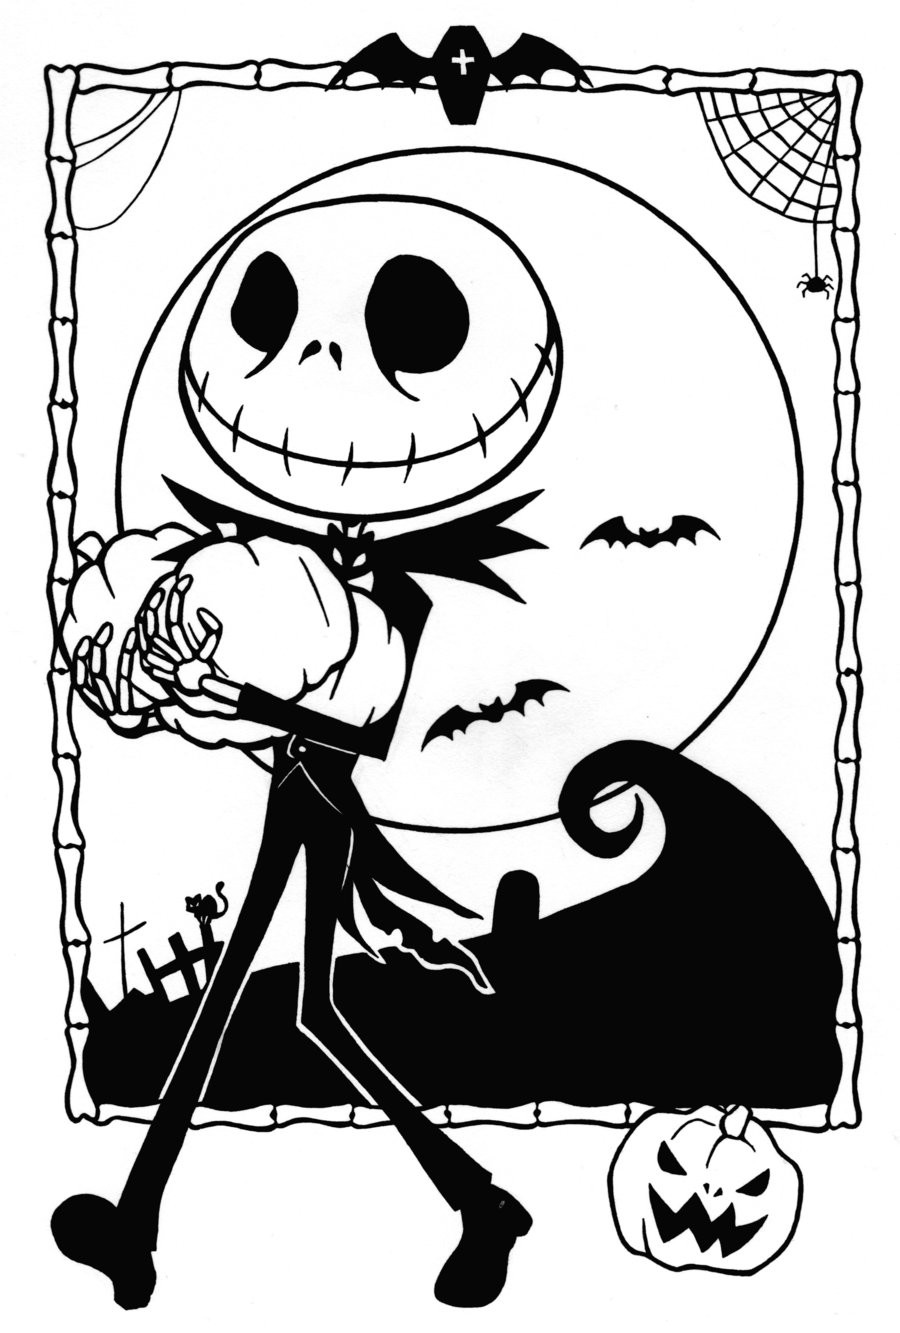 Free Coloring Sheets For Christmas To Print
 Free Printable Nightmare Before Christmas Coloring Pages